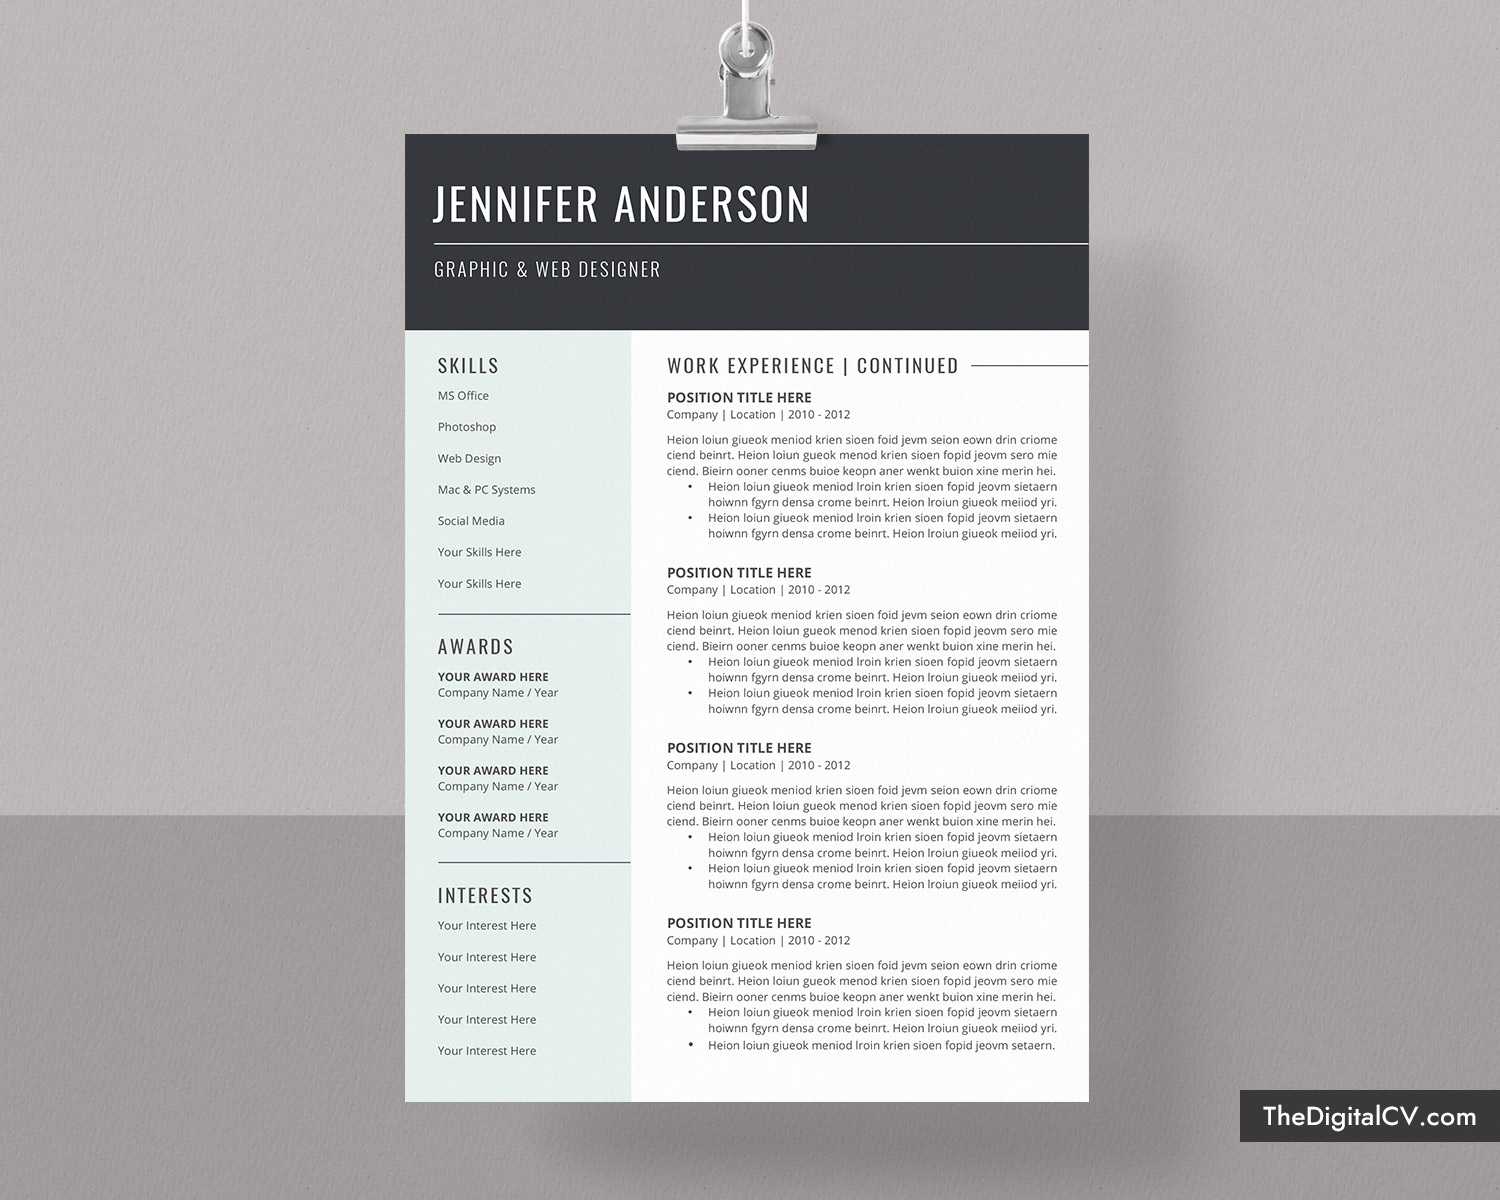 Basic And Simple Resume Template 2020 2021, Cv Template, Cover Letter,  Microsoft Word Resume Template, 1 3 Page, Modern Resume, Creative Resume, Regarding Simple Resume Template Microsoft Word